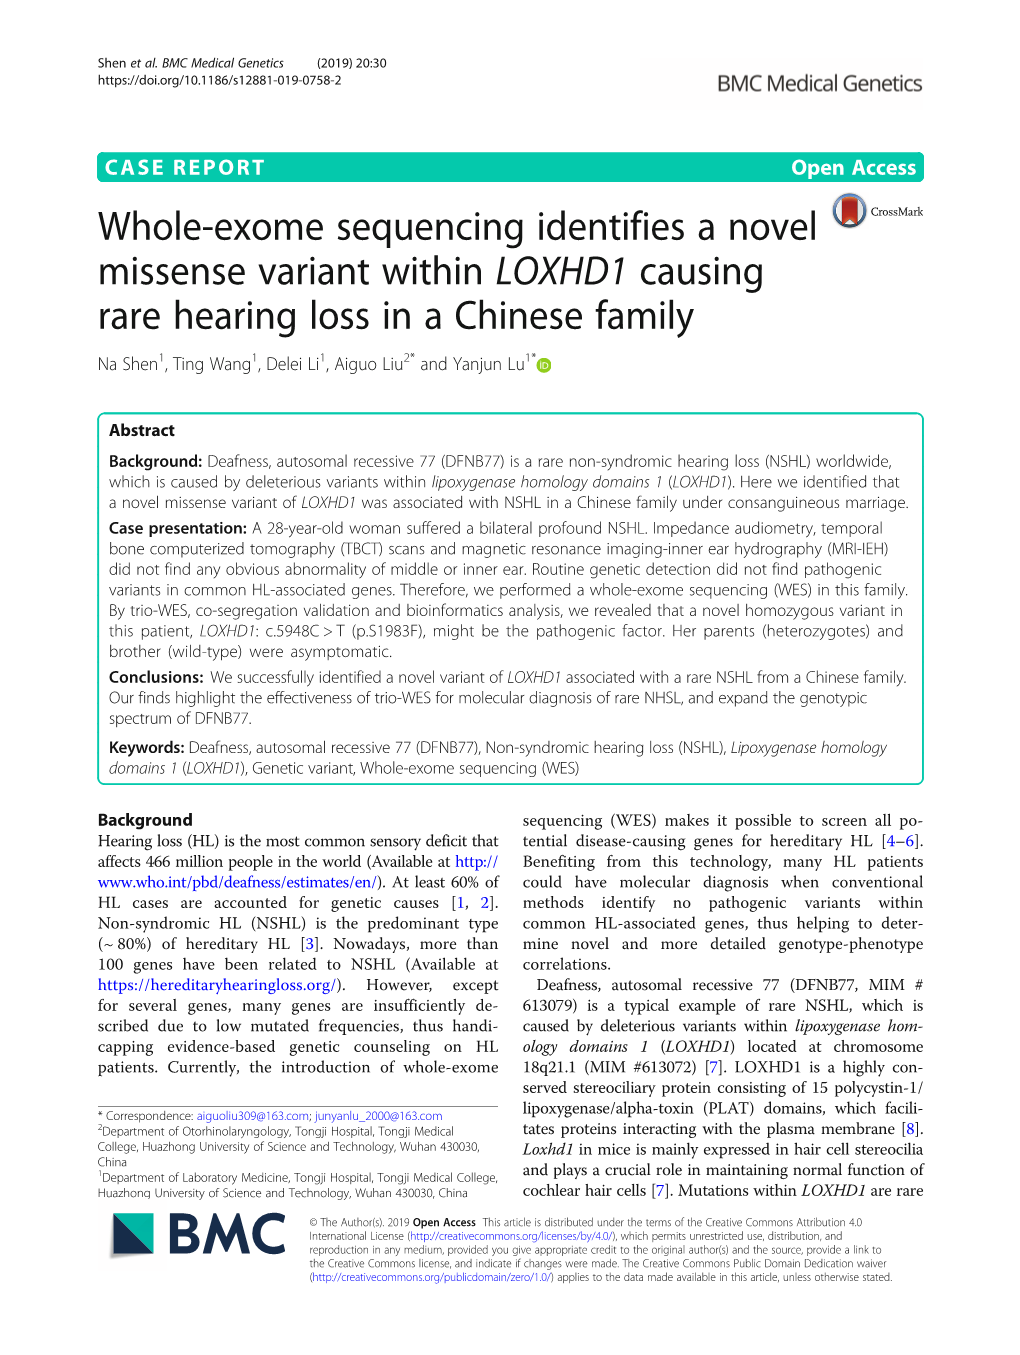 Whole-Exome Sequencing Identifies a Novel Missense Variant Within LOXHD1 Causing Rare Hearing Loss in a Chinese Family